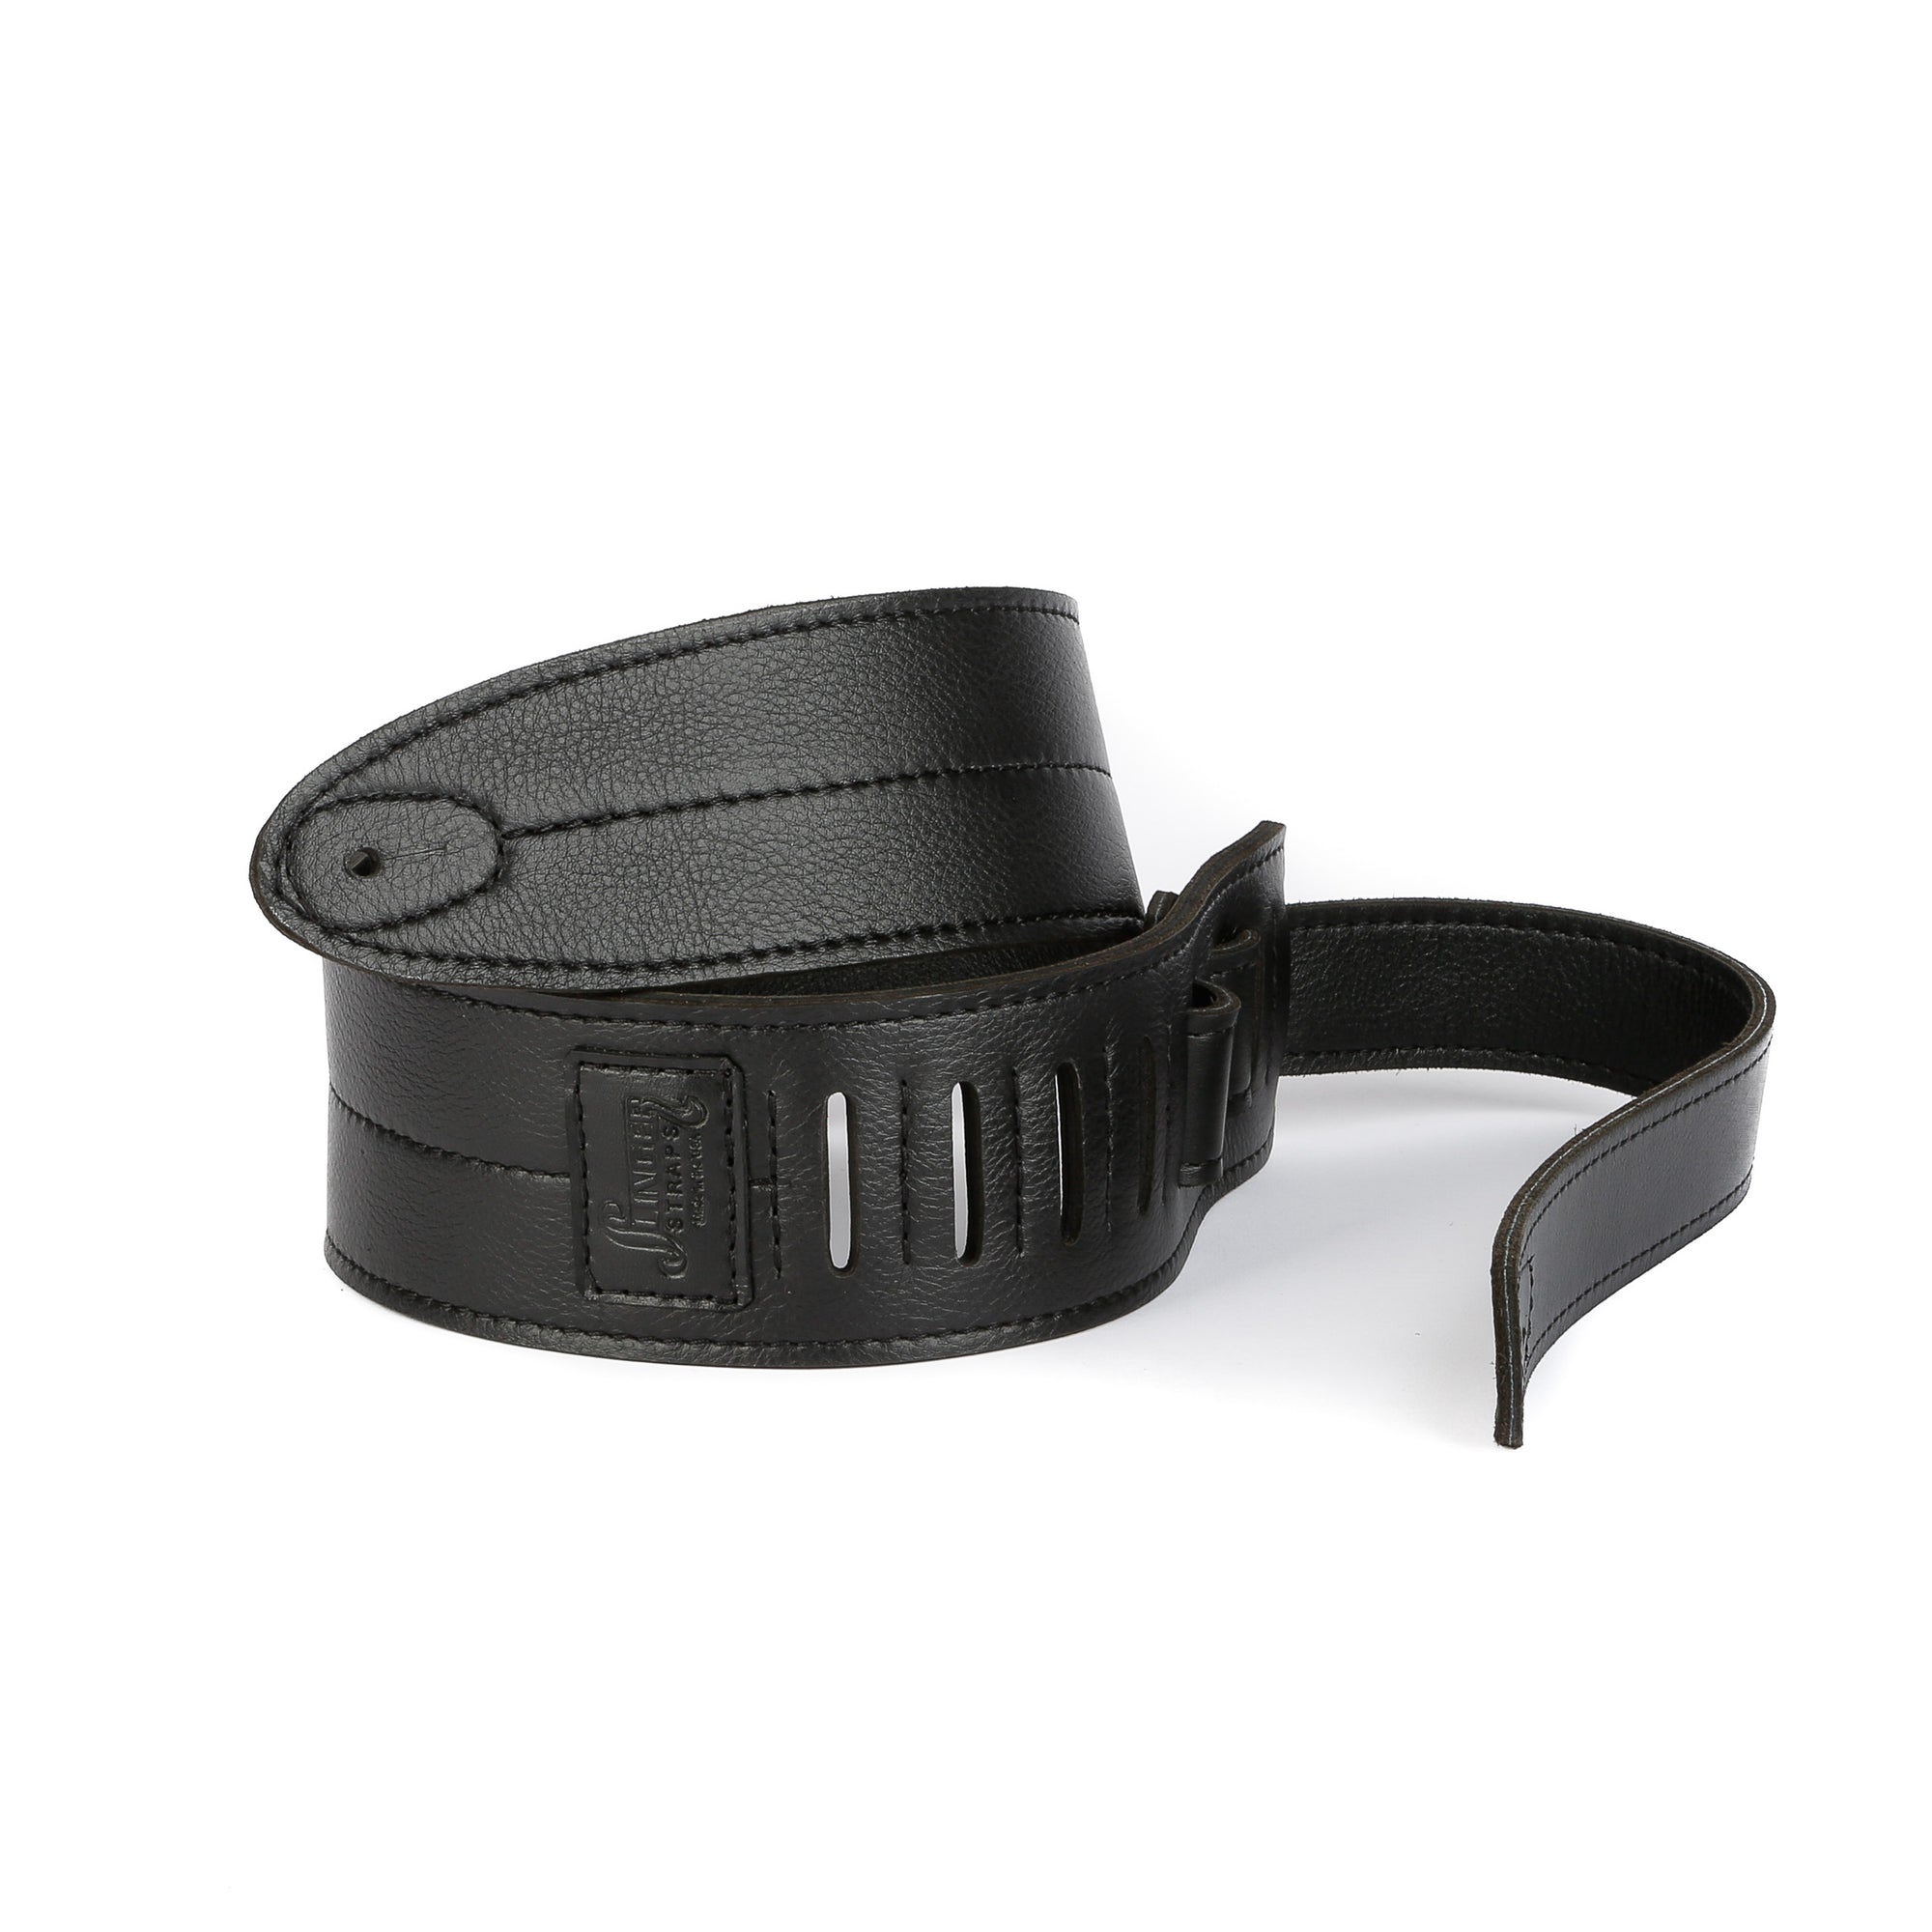 3-inch wide black leather guitar strap with stitch down the middle rolled up on side